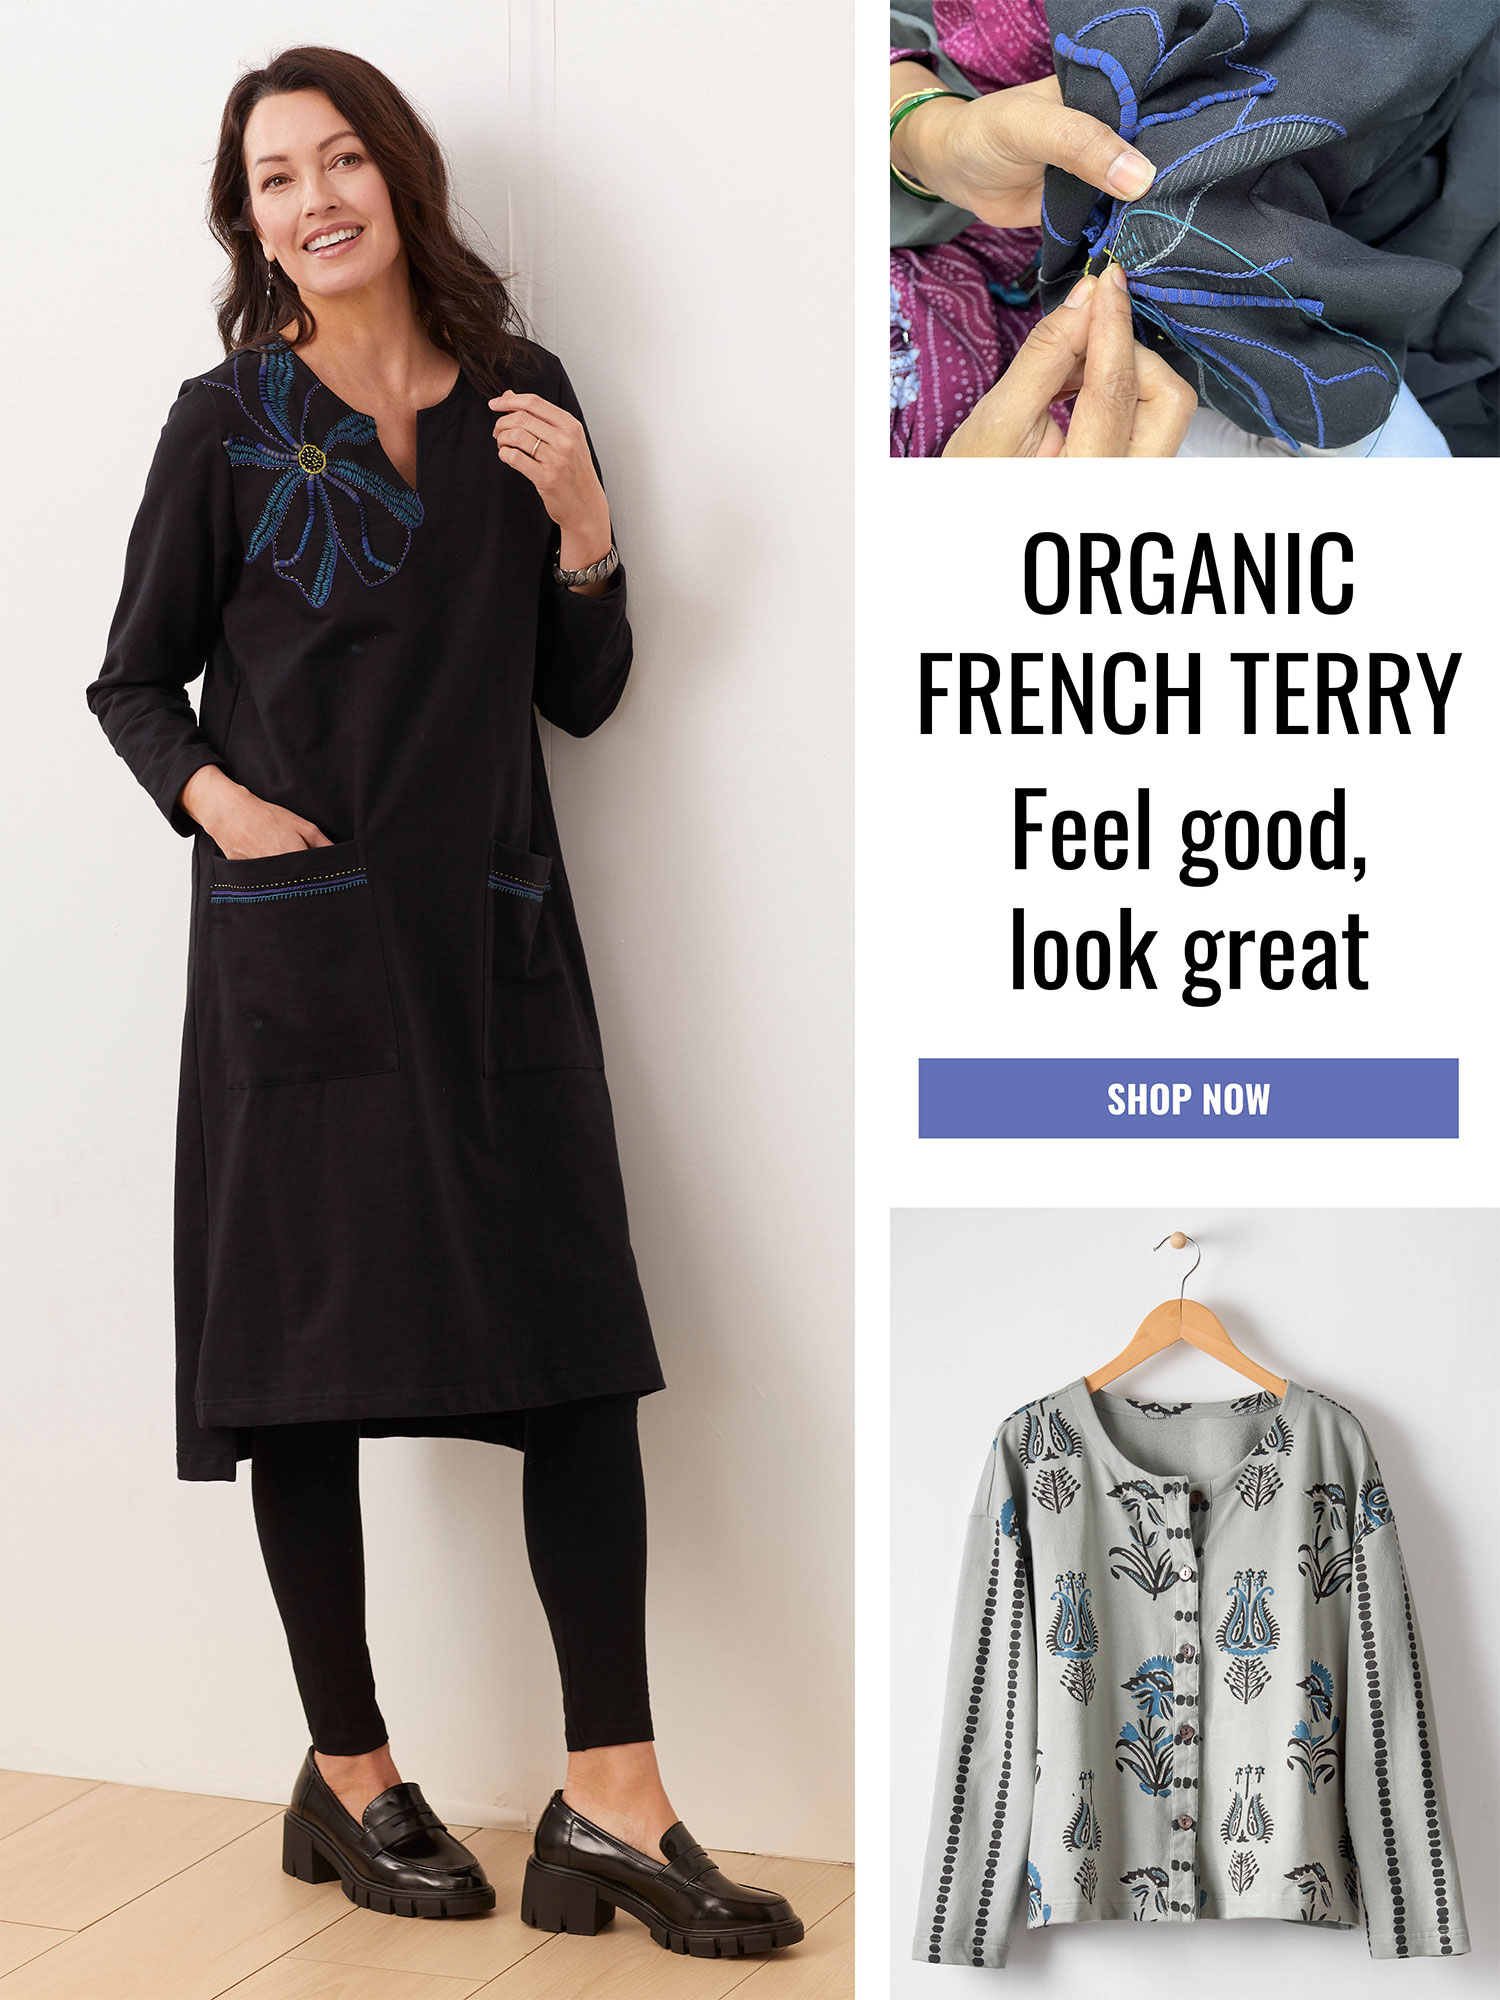 ORGANIC FRENCH TERRY Feel good, look great SHOP NOW